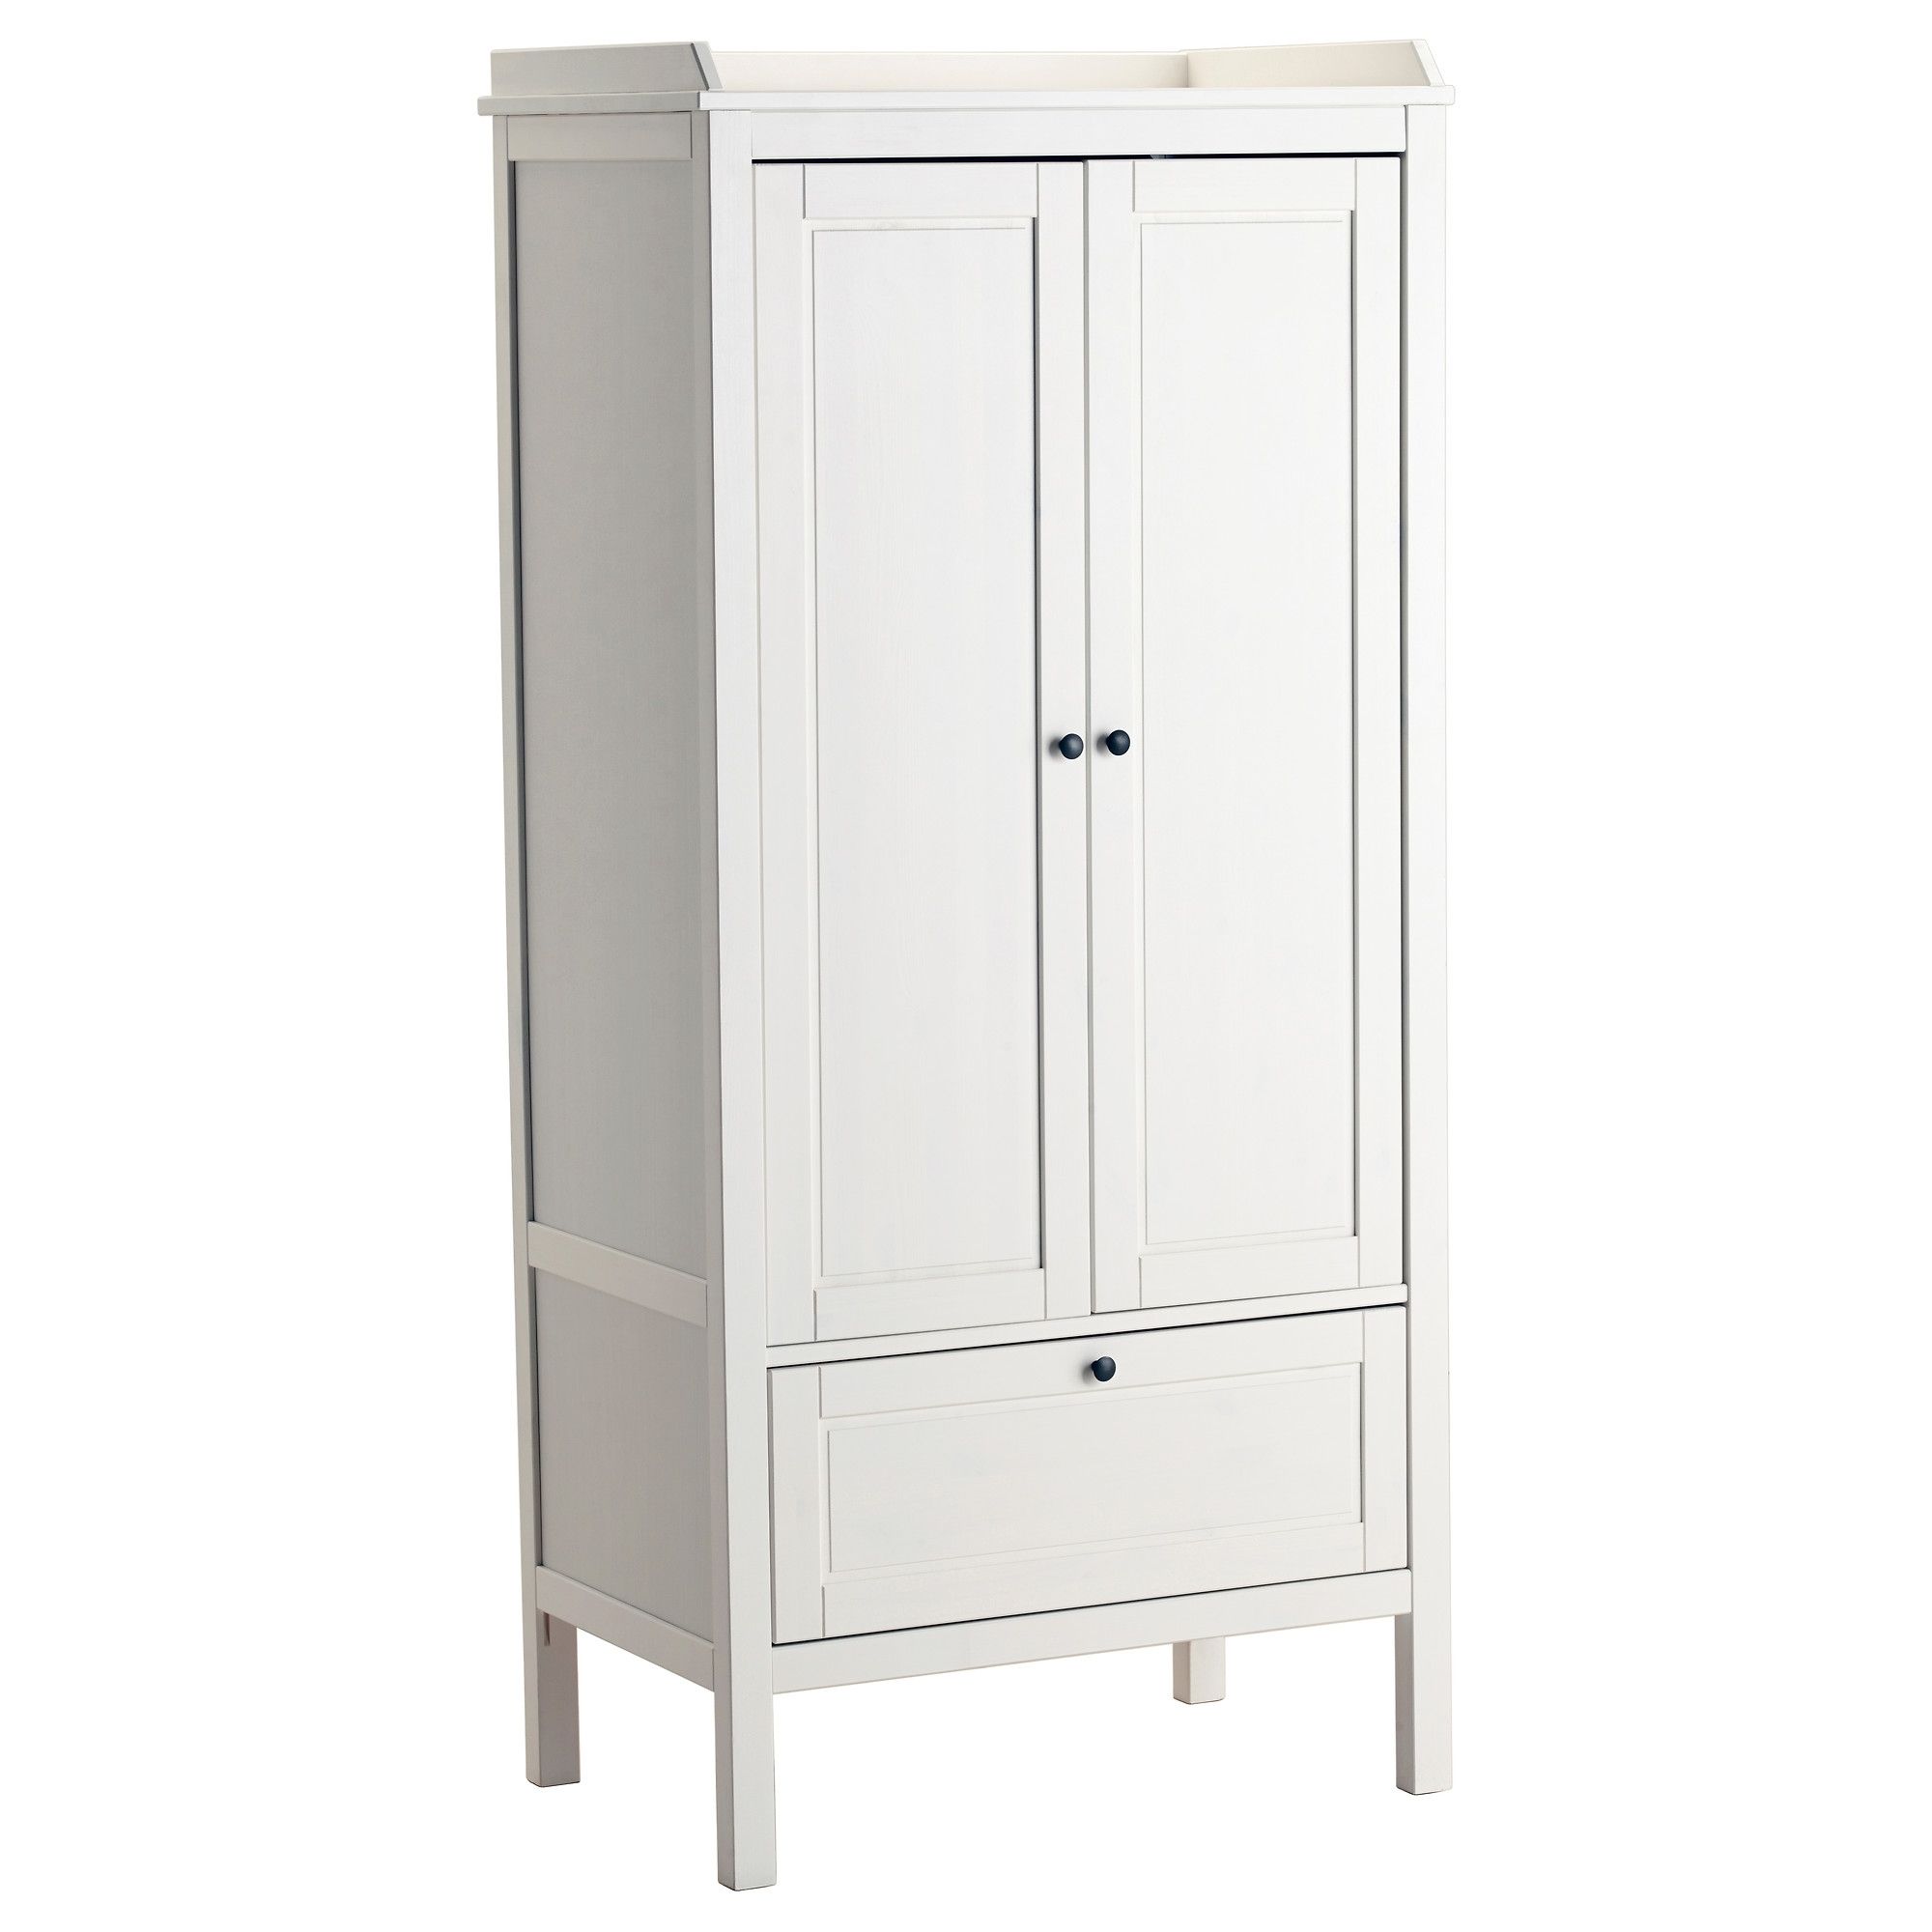 White Wood Wardrobes With Drawers Throughout Famous White Wood For Wardrobes Effect Wardrobe Wooden Slatted Doors (View 9 of 15)